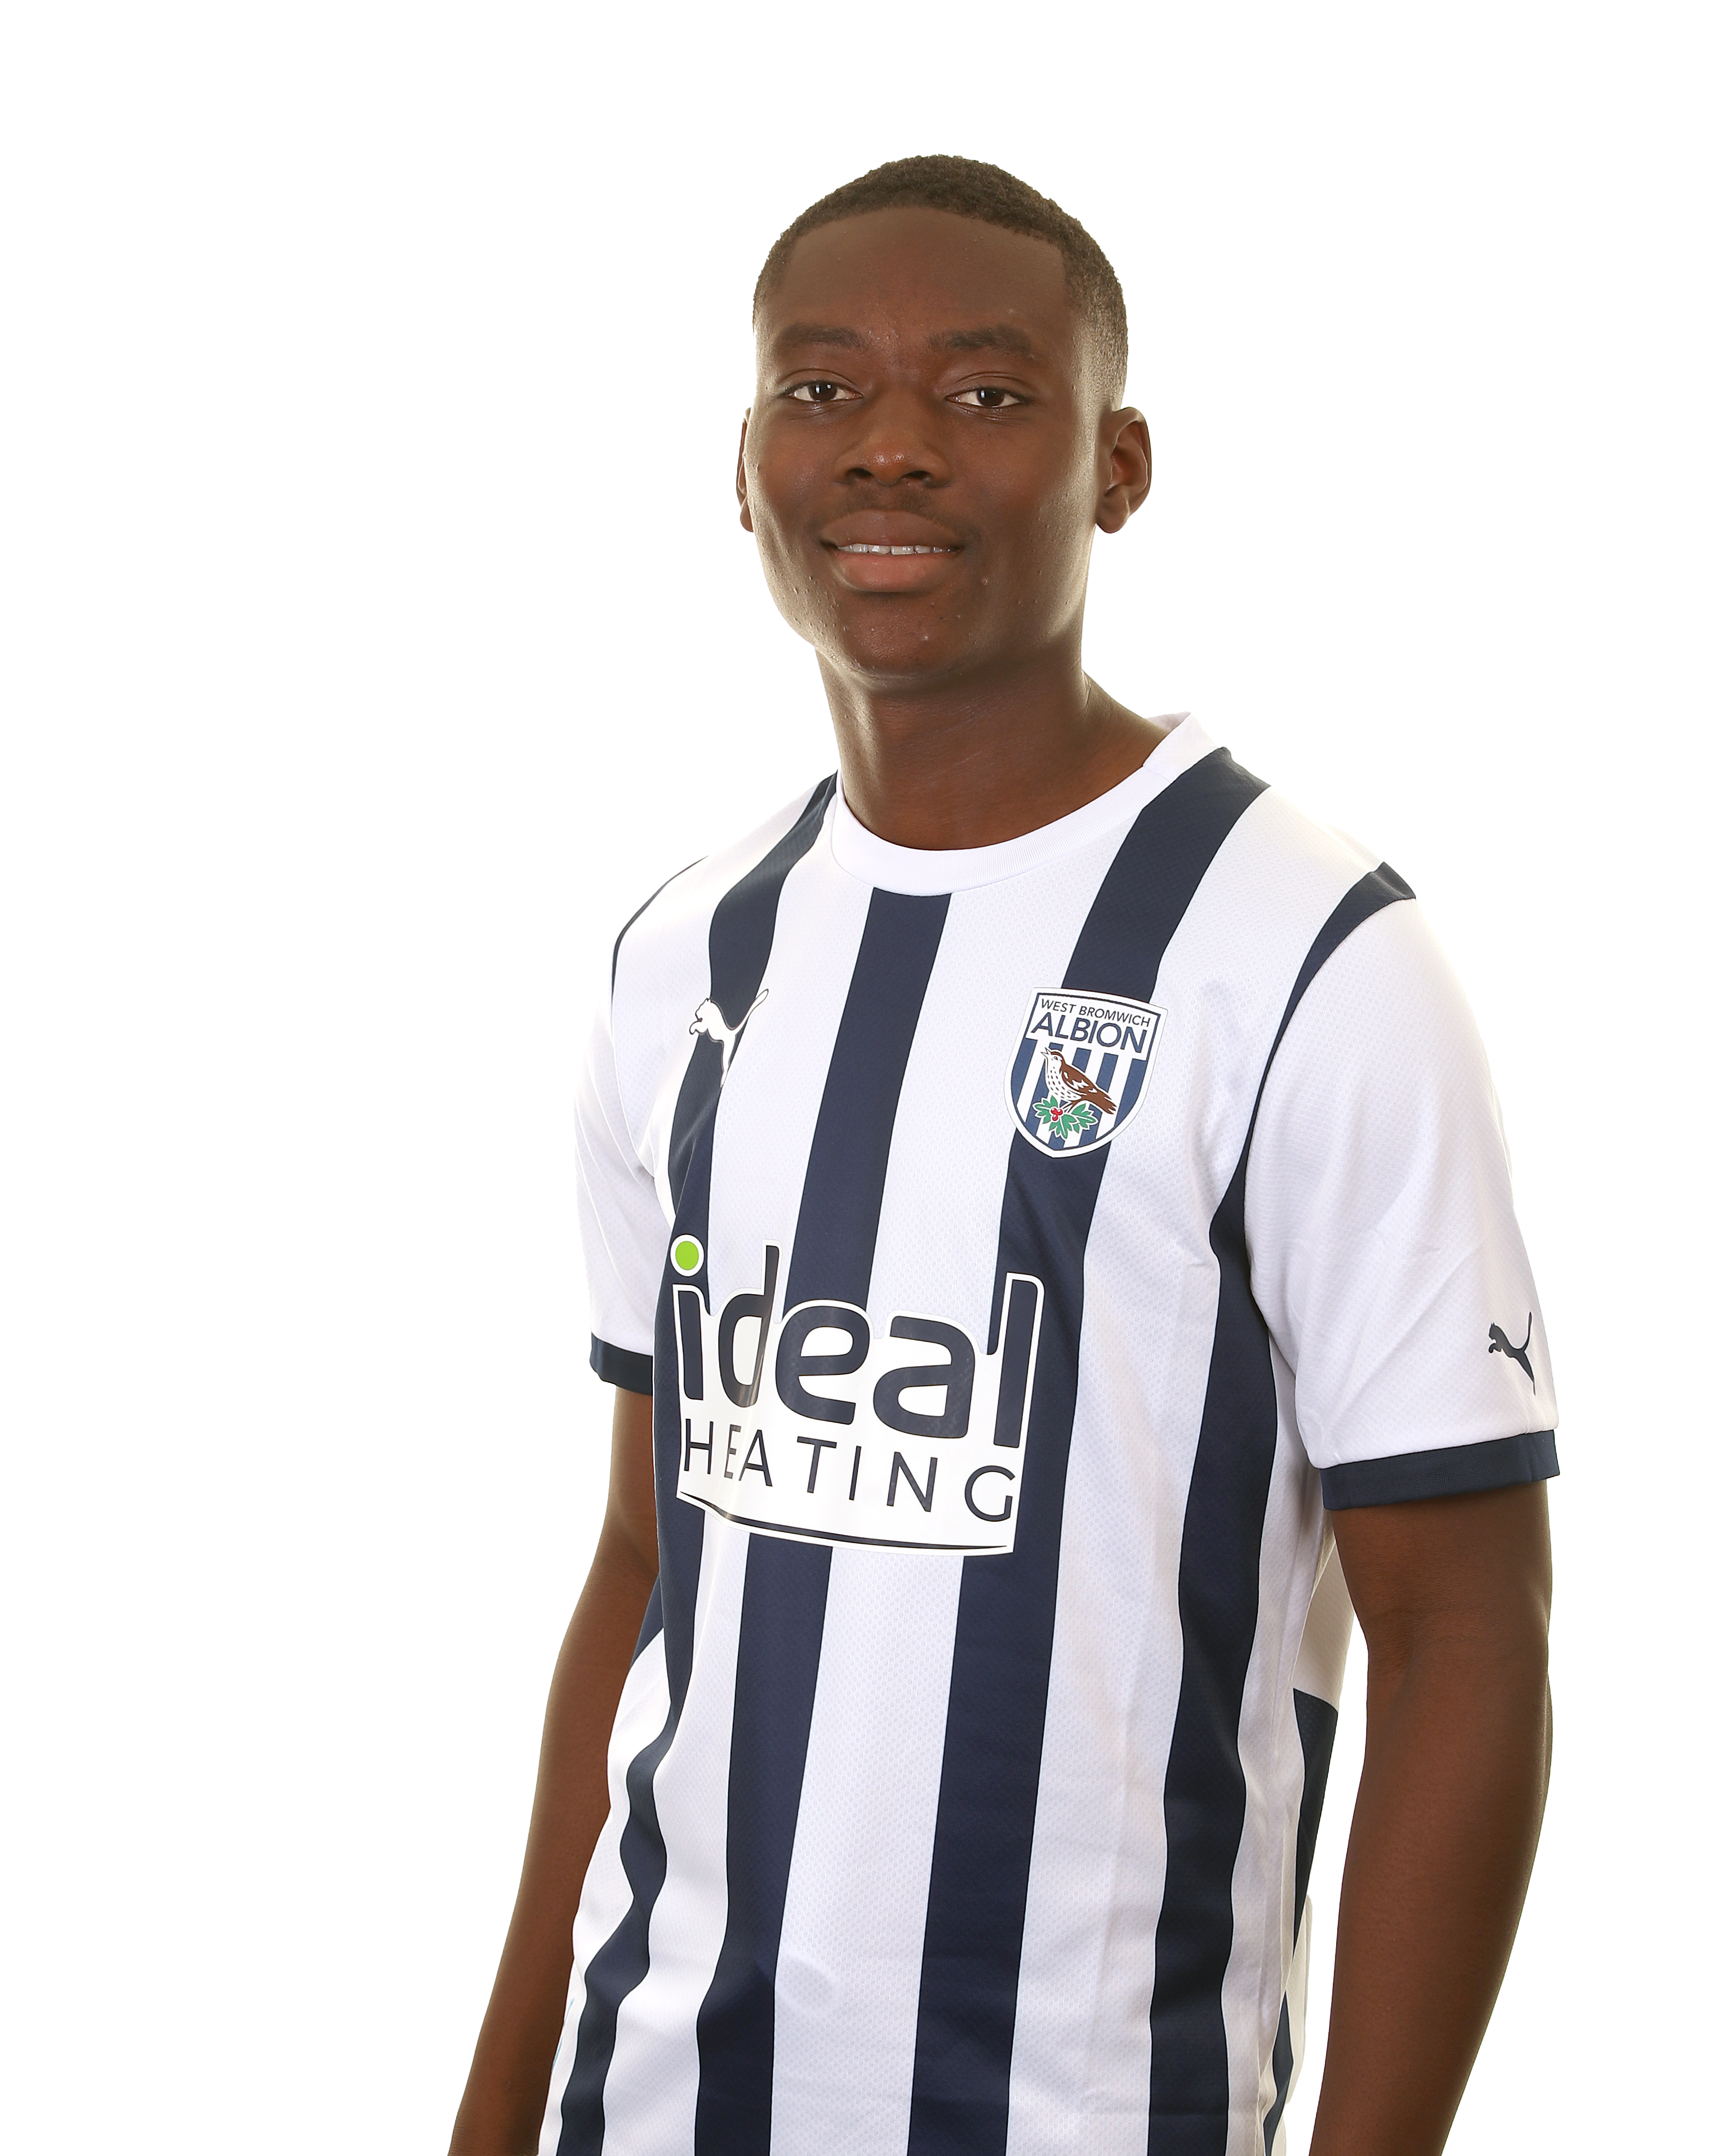 A photo headshot of Albion Under-18s player Cheick Kone ahead of the 2023/24 season